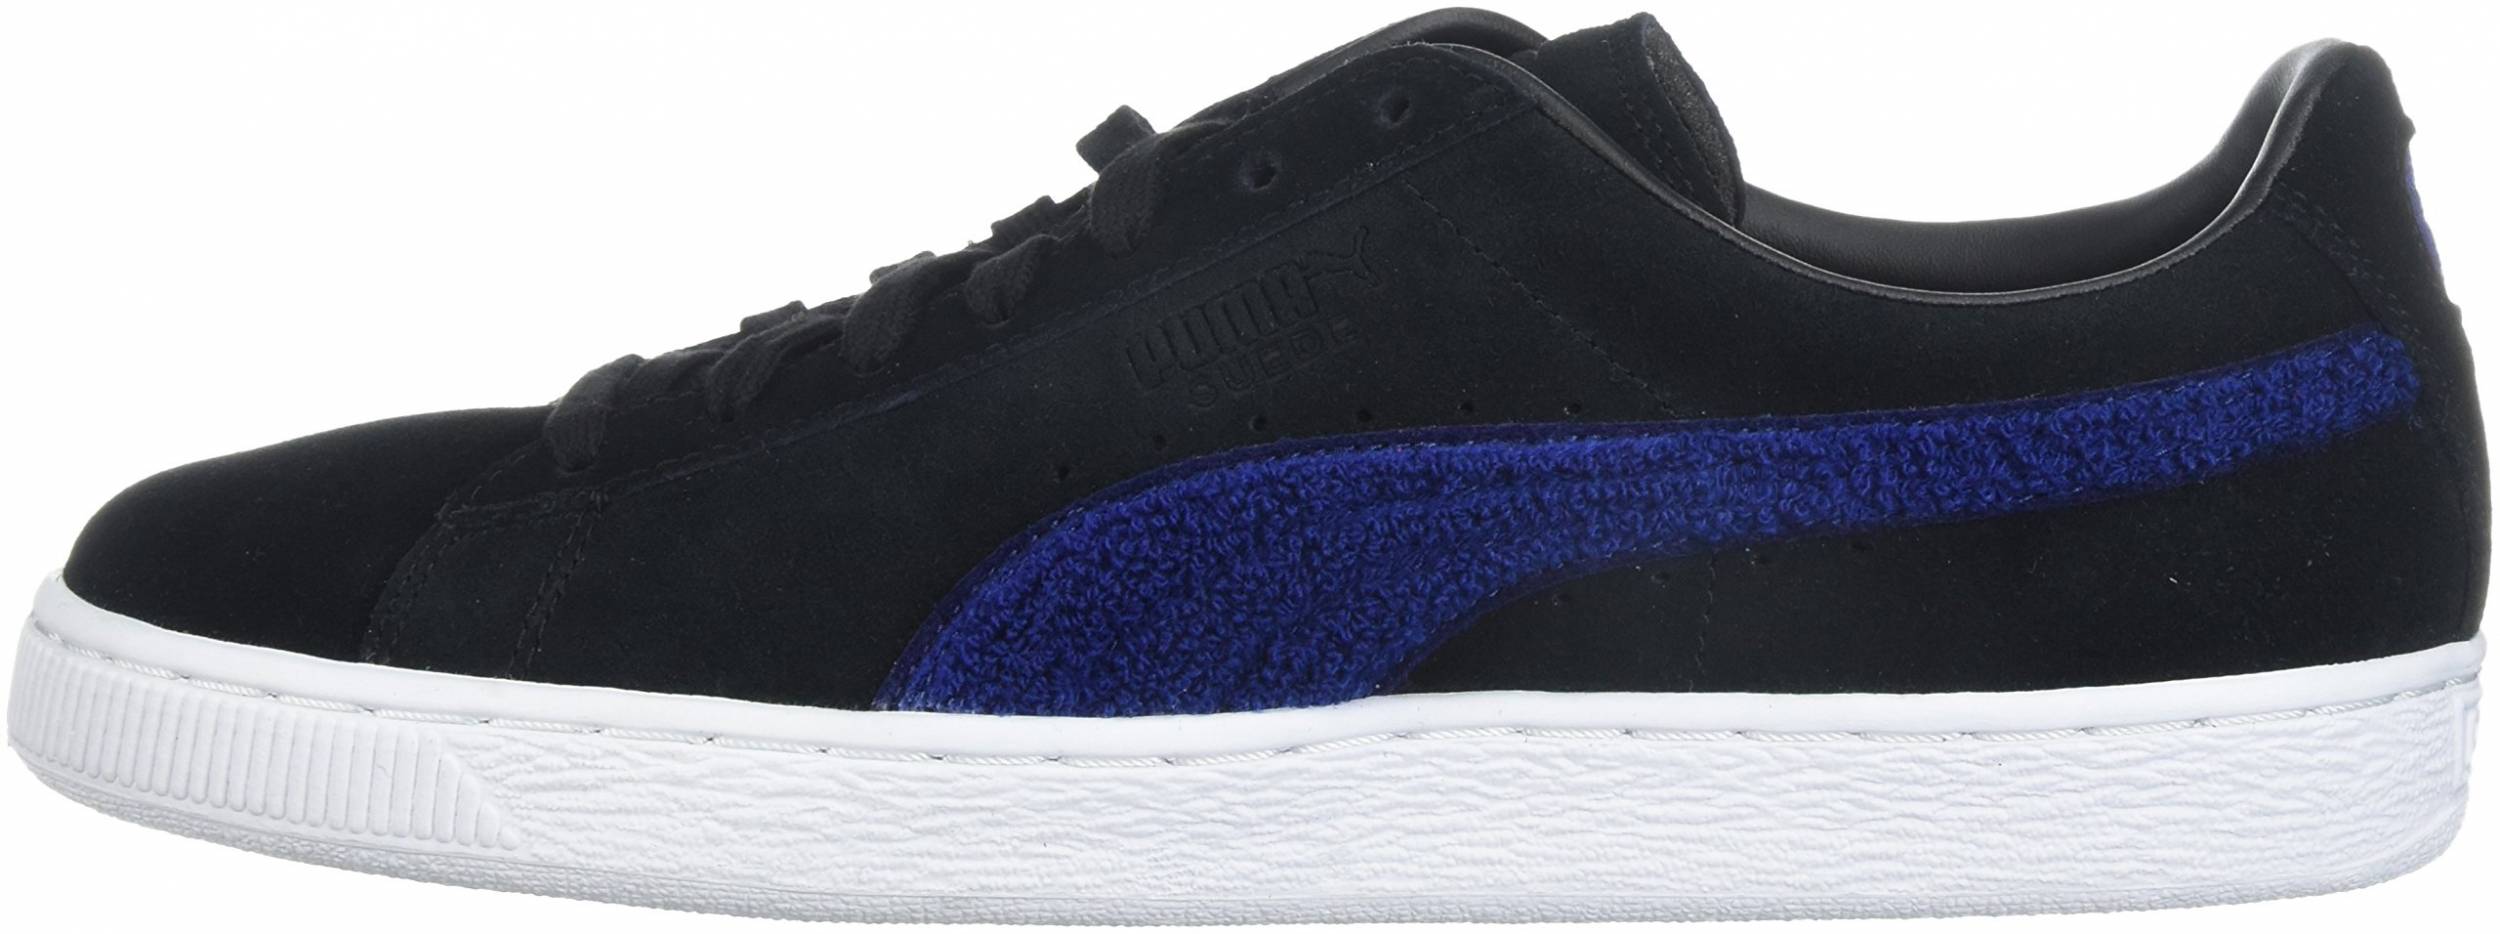 Only €64 - Buy Puma Suede Classic Terry 